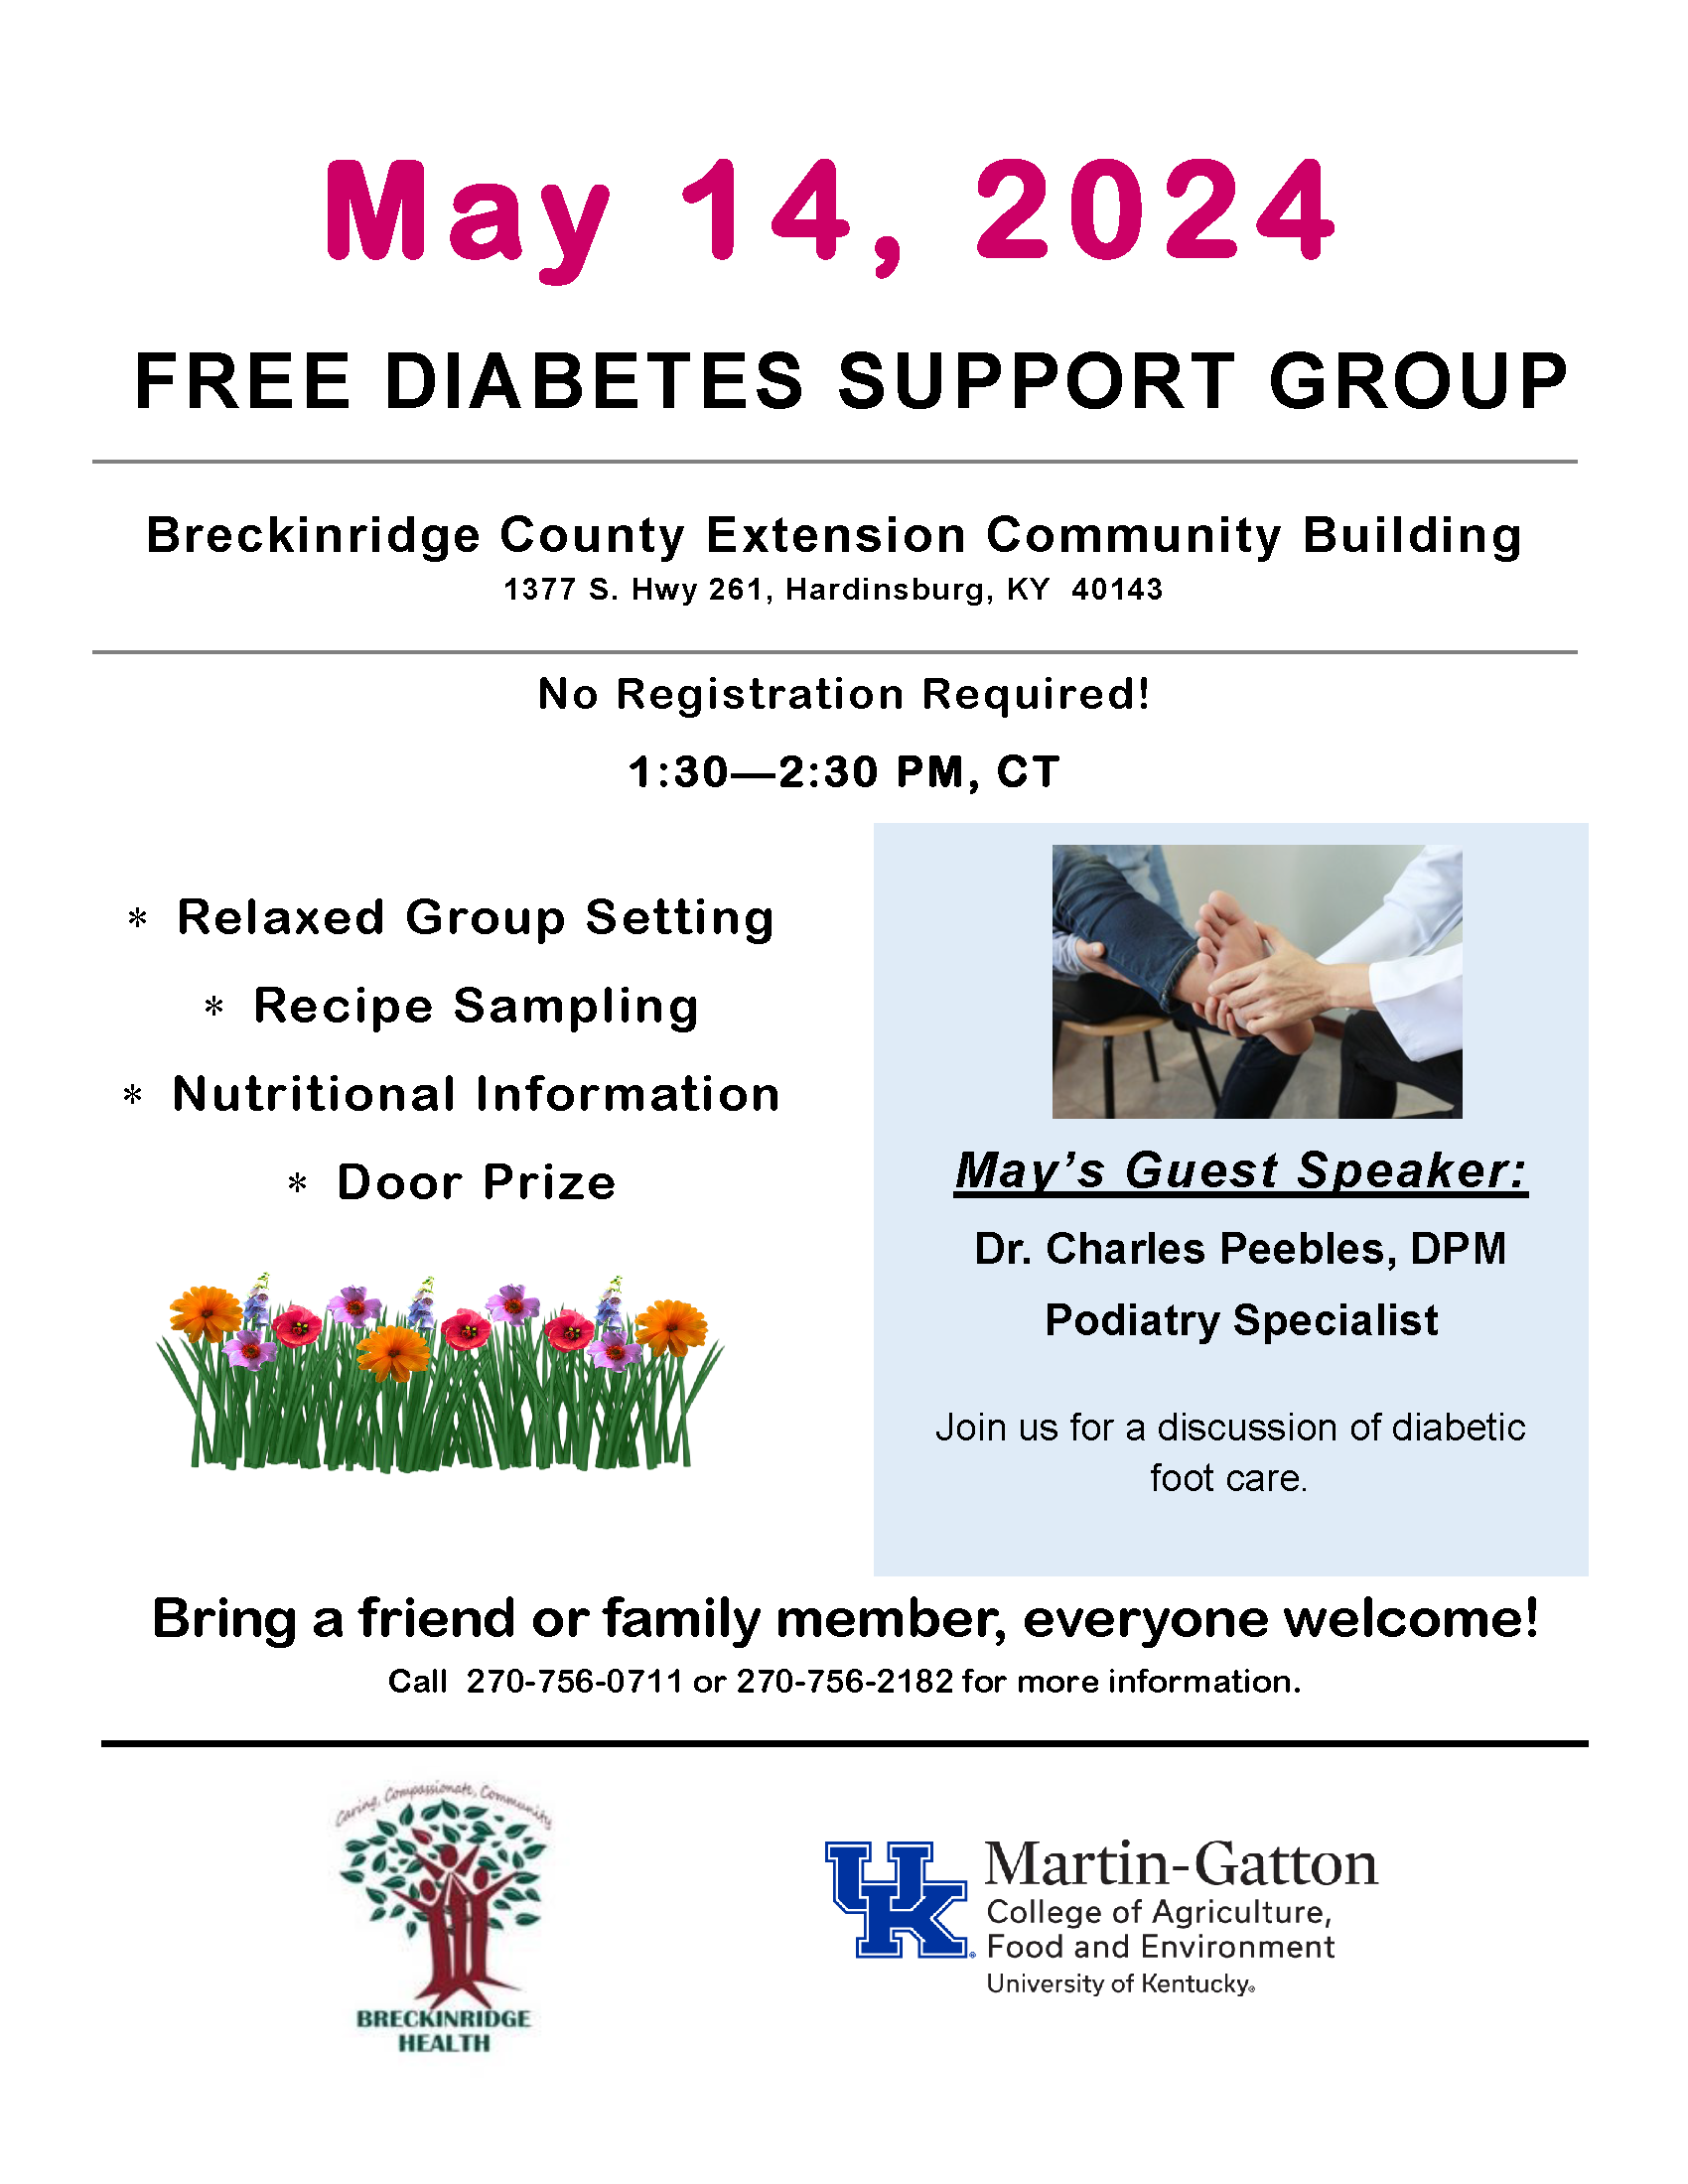 Free Diabetes Support